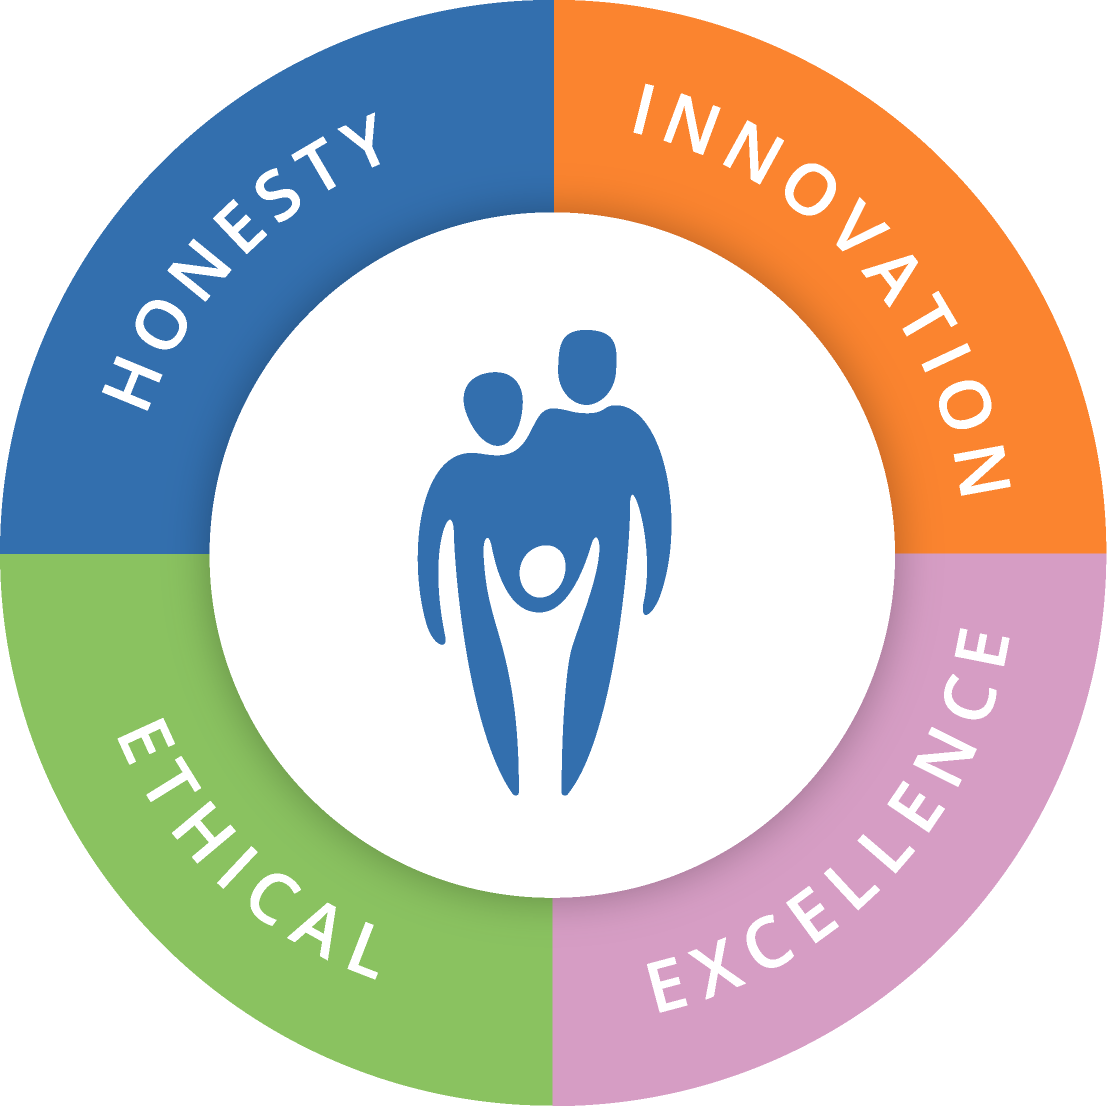 Honesty, Innovation, Ethics, and Excellence